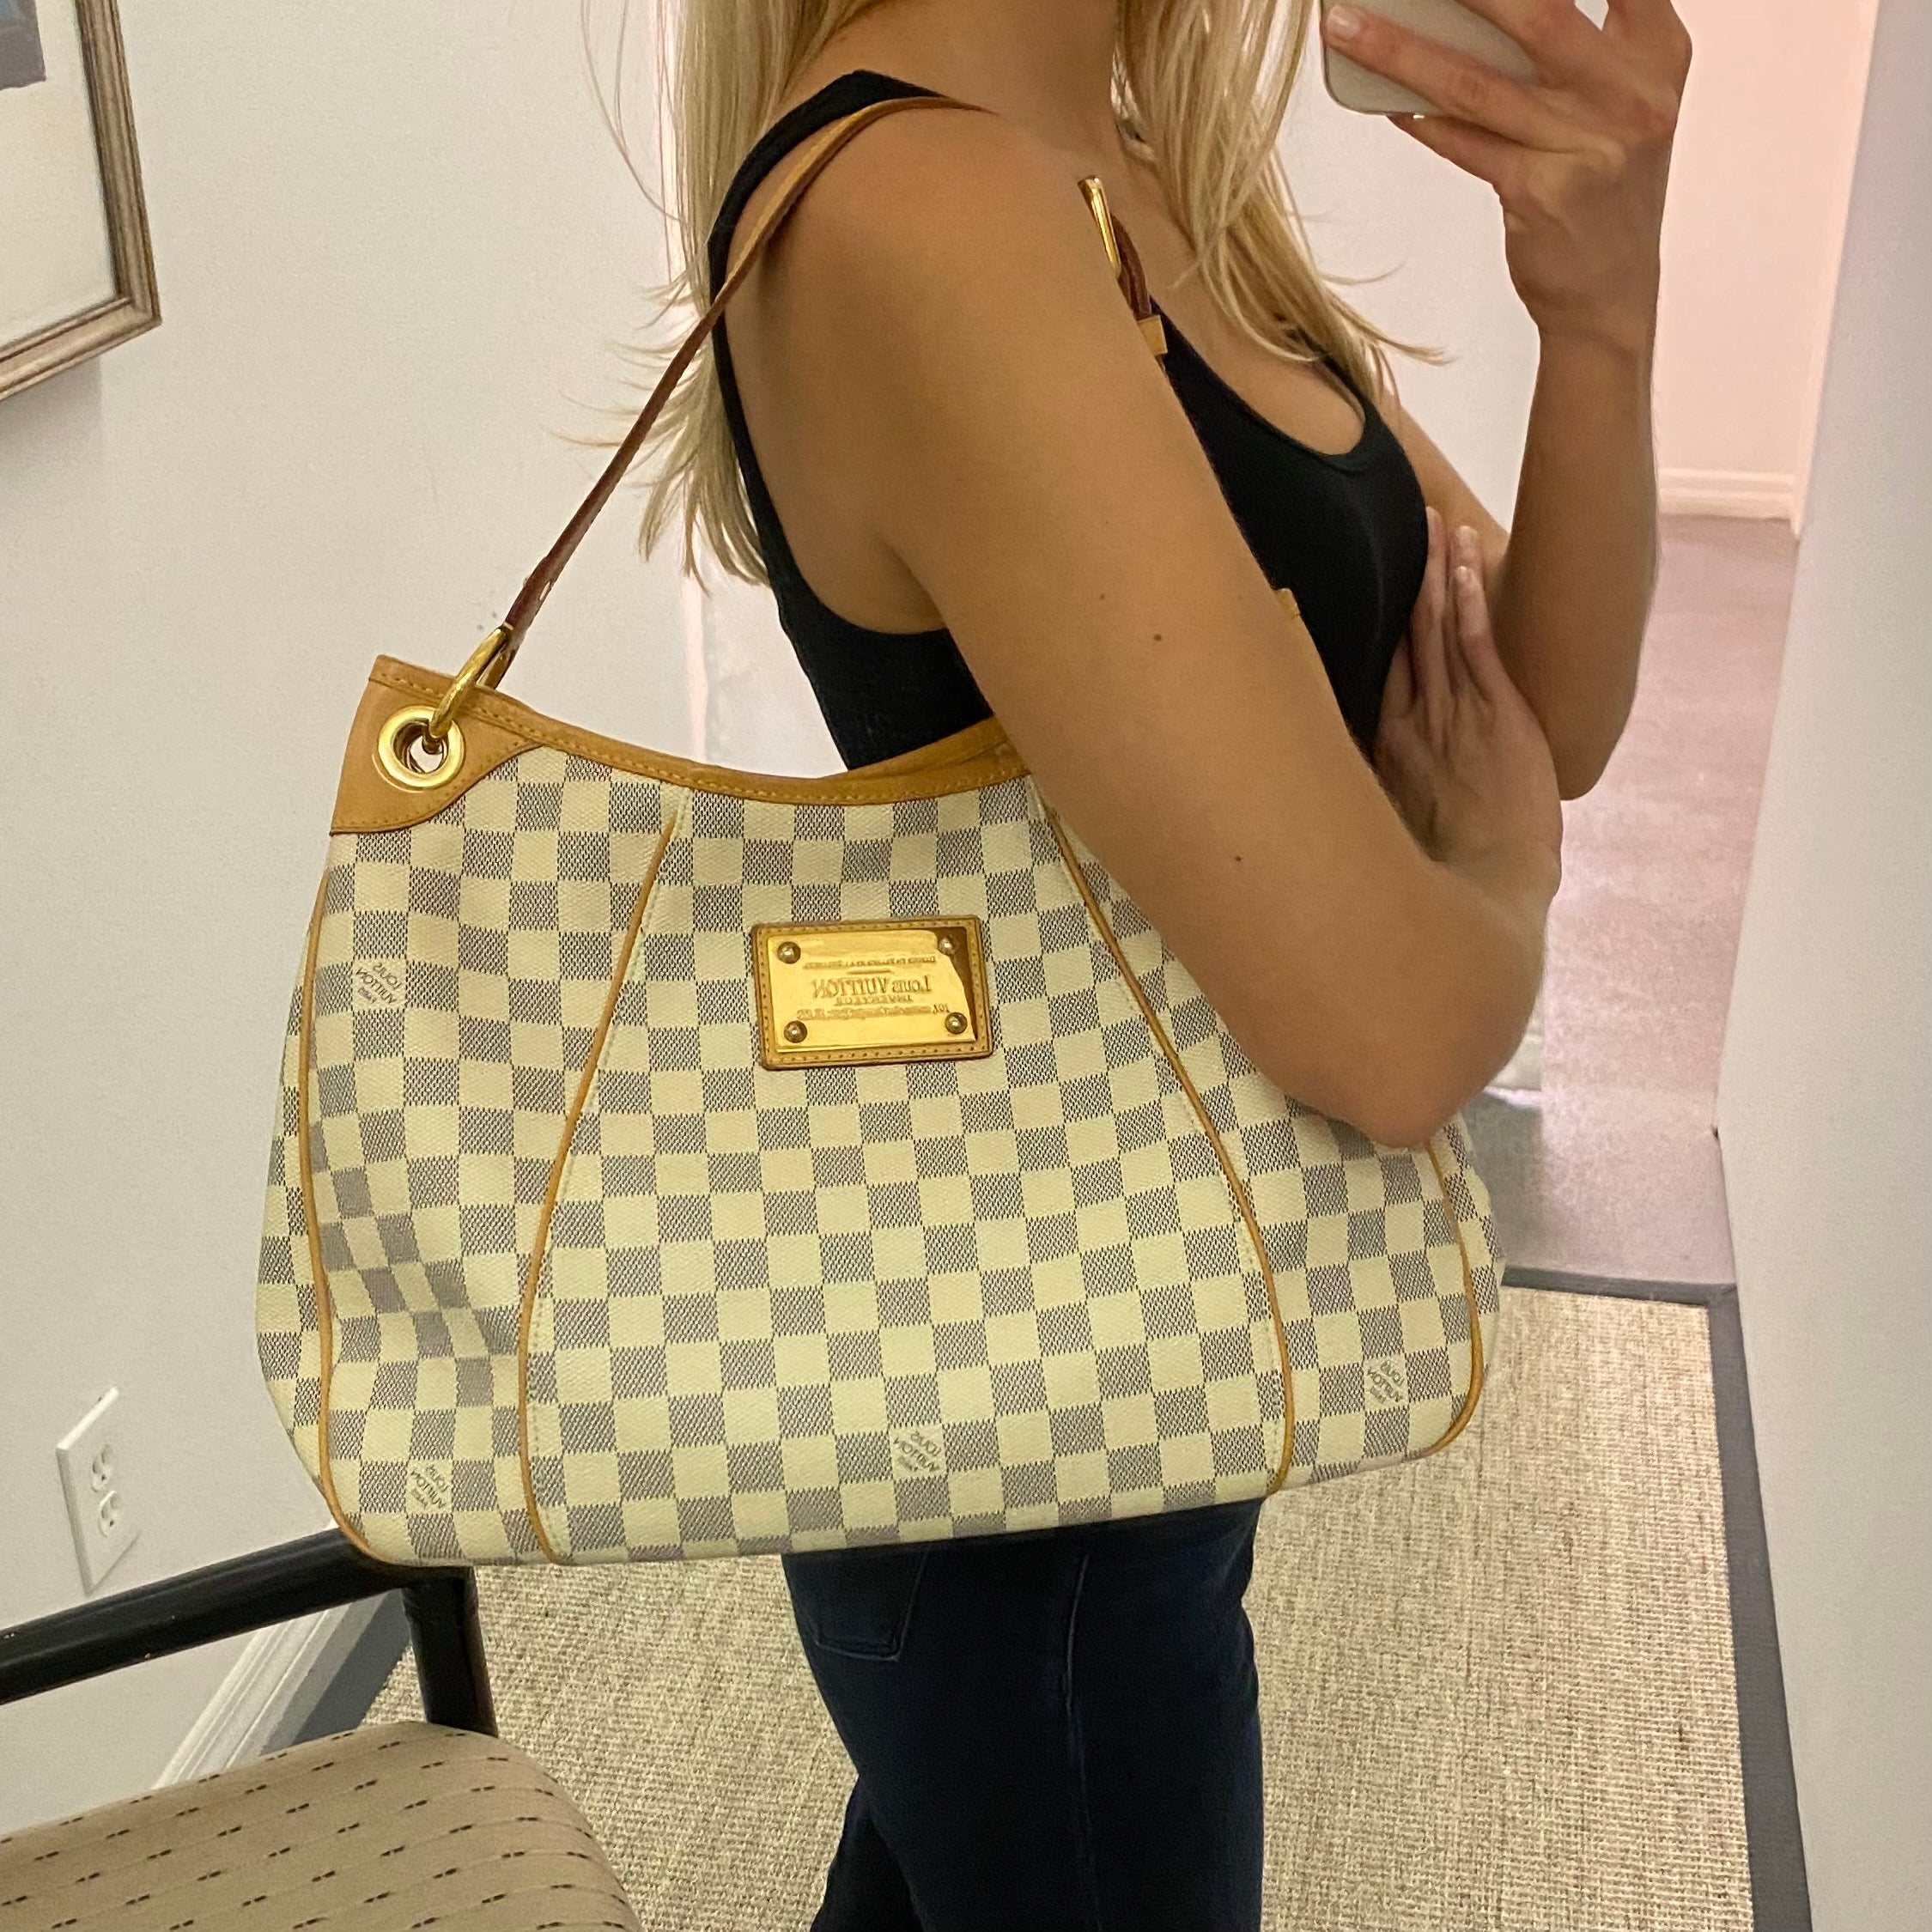 This Fabulous Louis Vuitton Salina GM Damier Azur bag was originally $1,800  & Catwalk Consignment is selling it for $999!! FREE SHIPPING DM TO  PURCHASE!, By Catwalk Consignment Boutique